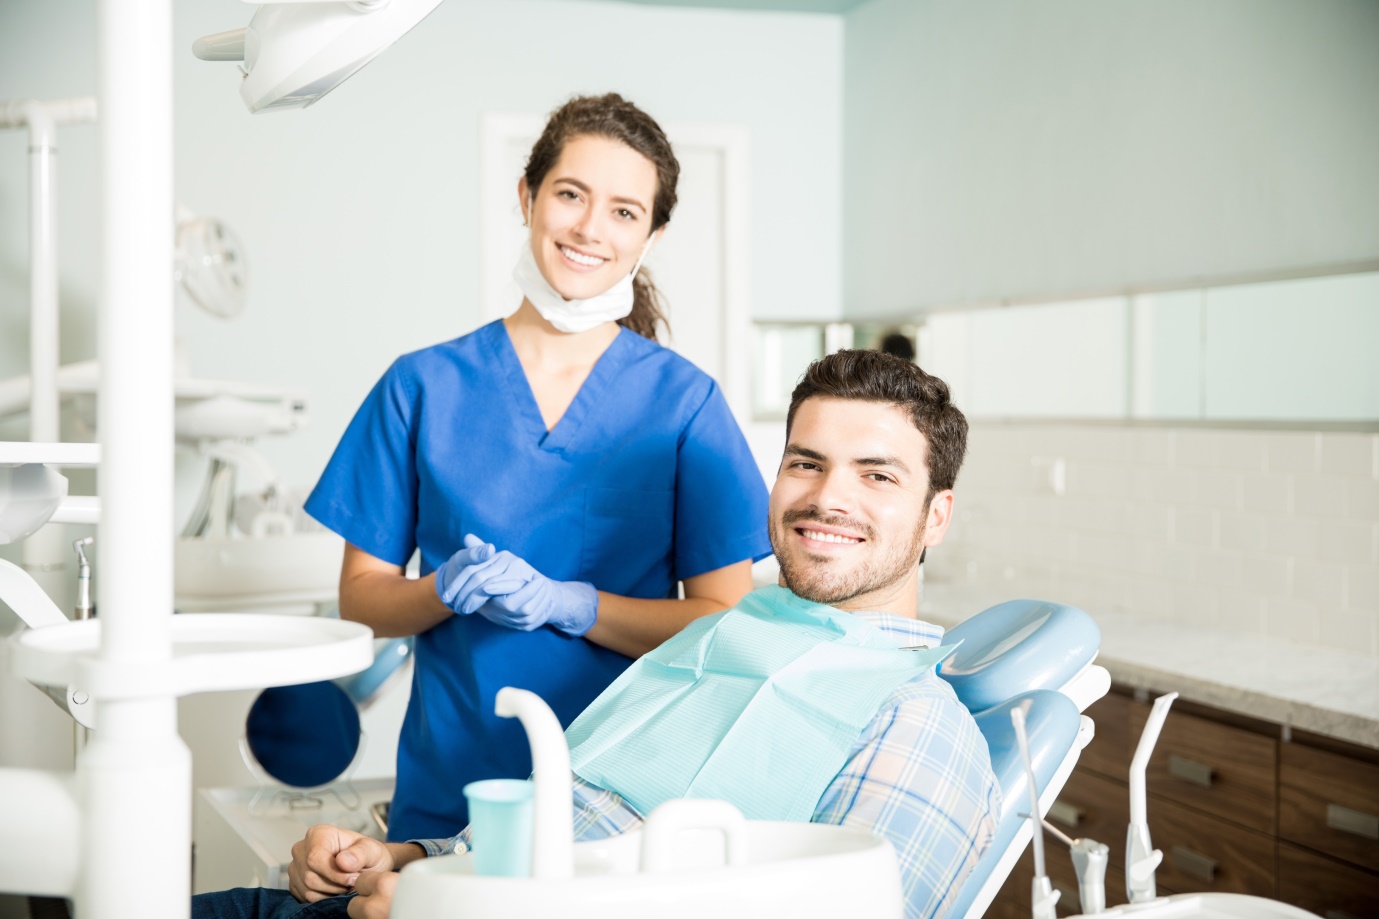 Precautions to be Taken When Visiting Your Dentist